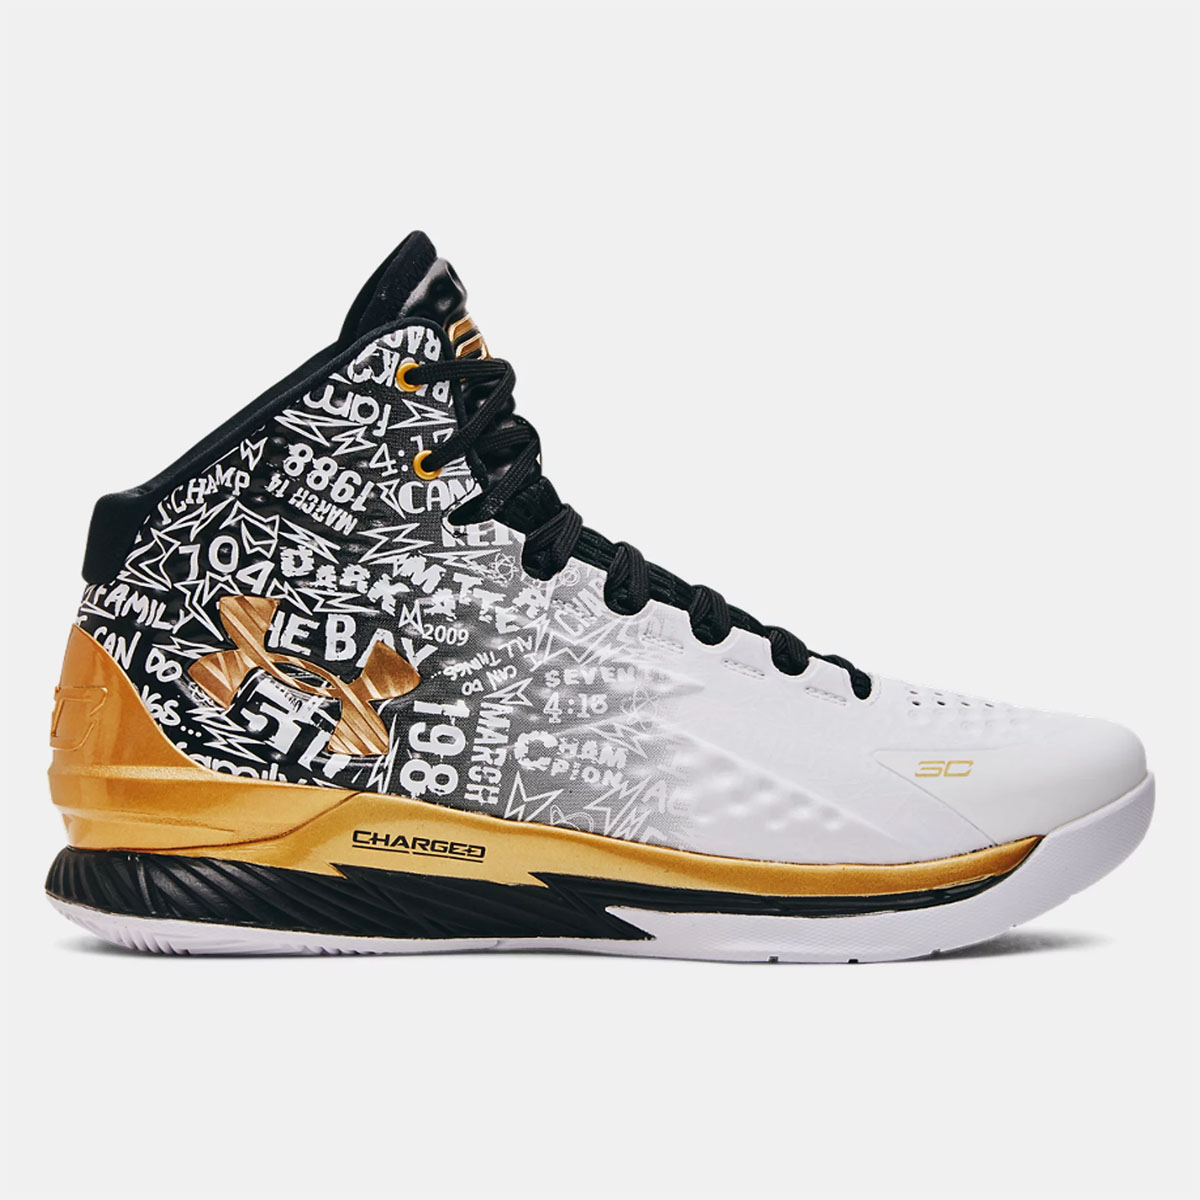 Curry 1 Unanimous